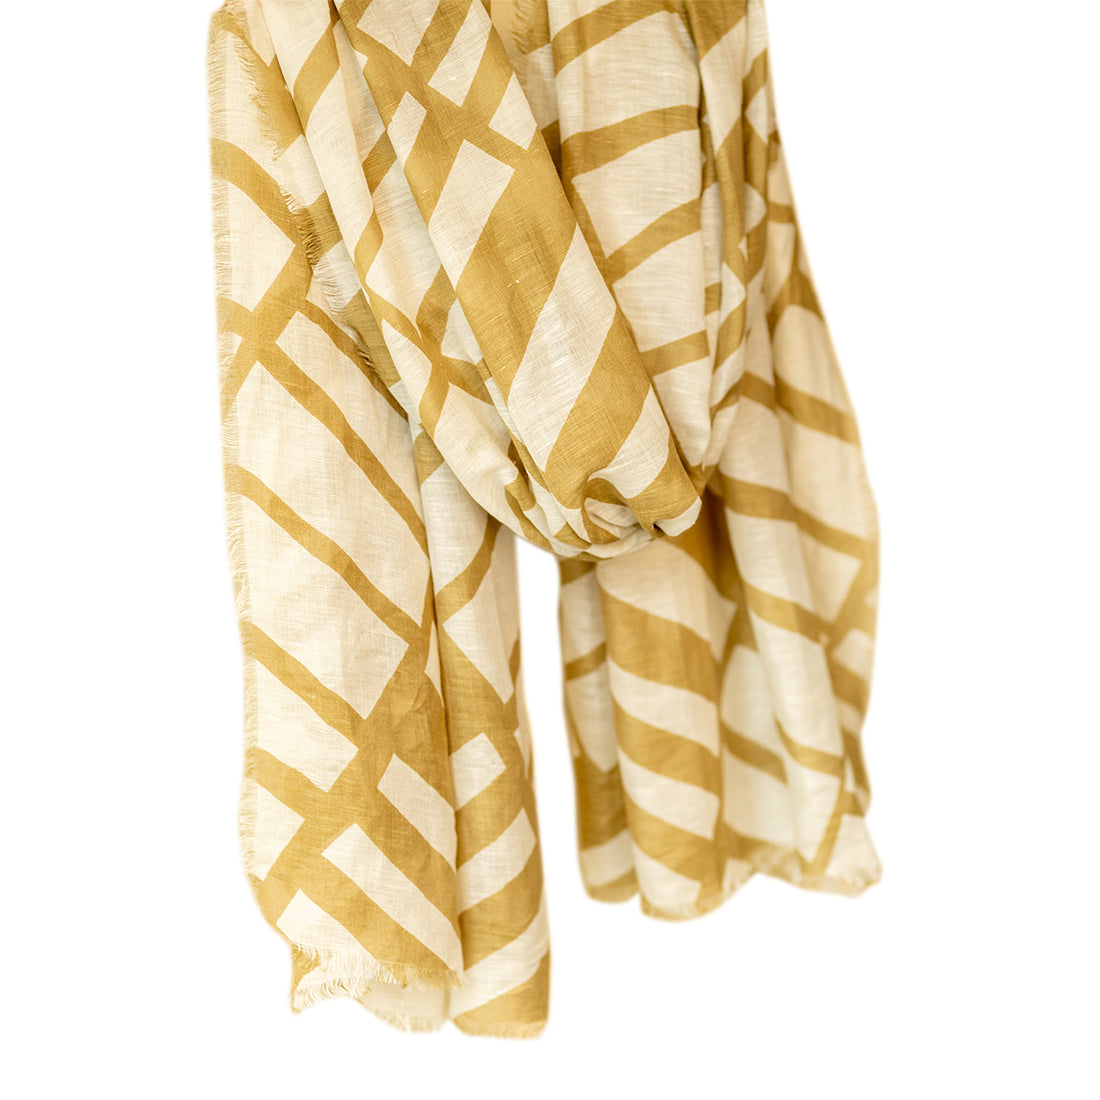 Tan & White Abstract Criss-Cross Stripes Printed Italian Fringes Oversized Modal Scarf